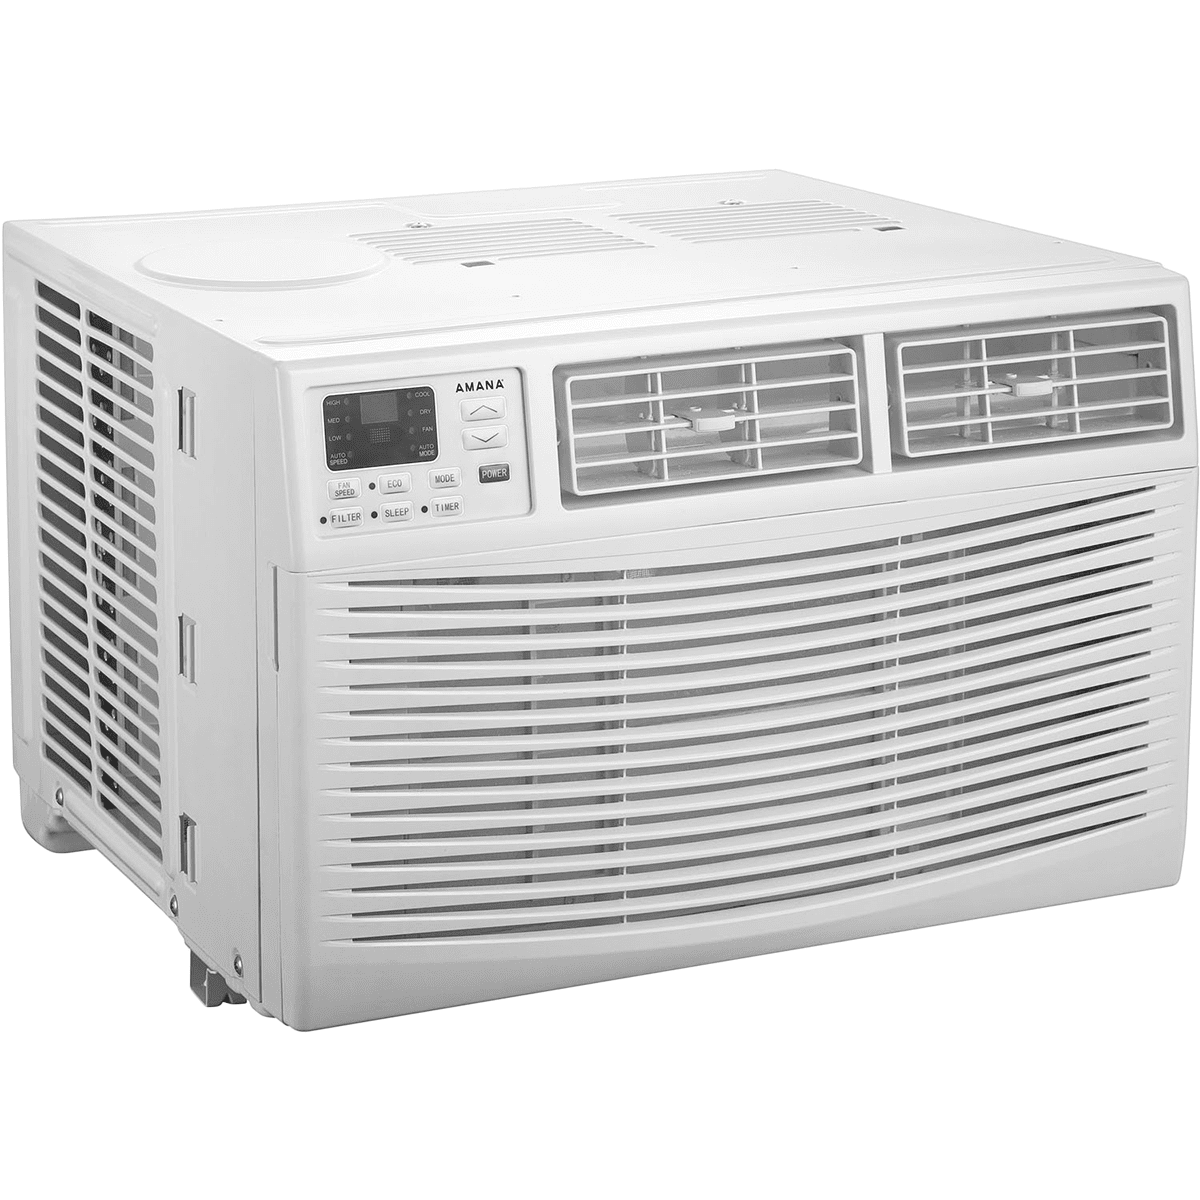 Amana 8000 Btu Window Air Conditioner With Electronic Controls Amap081bw